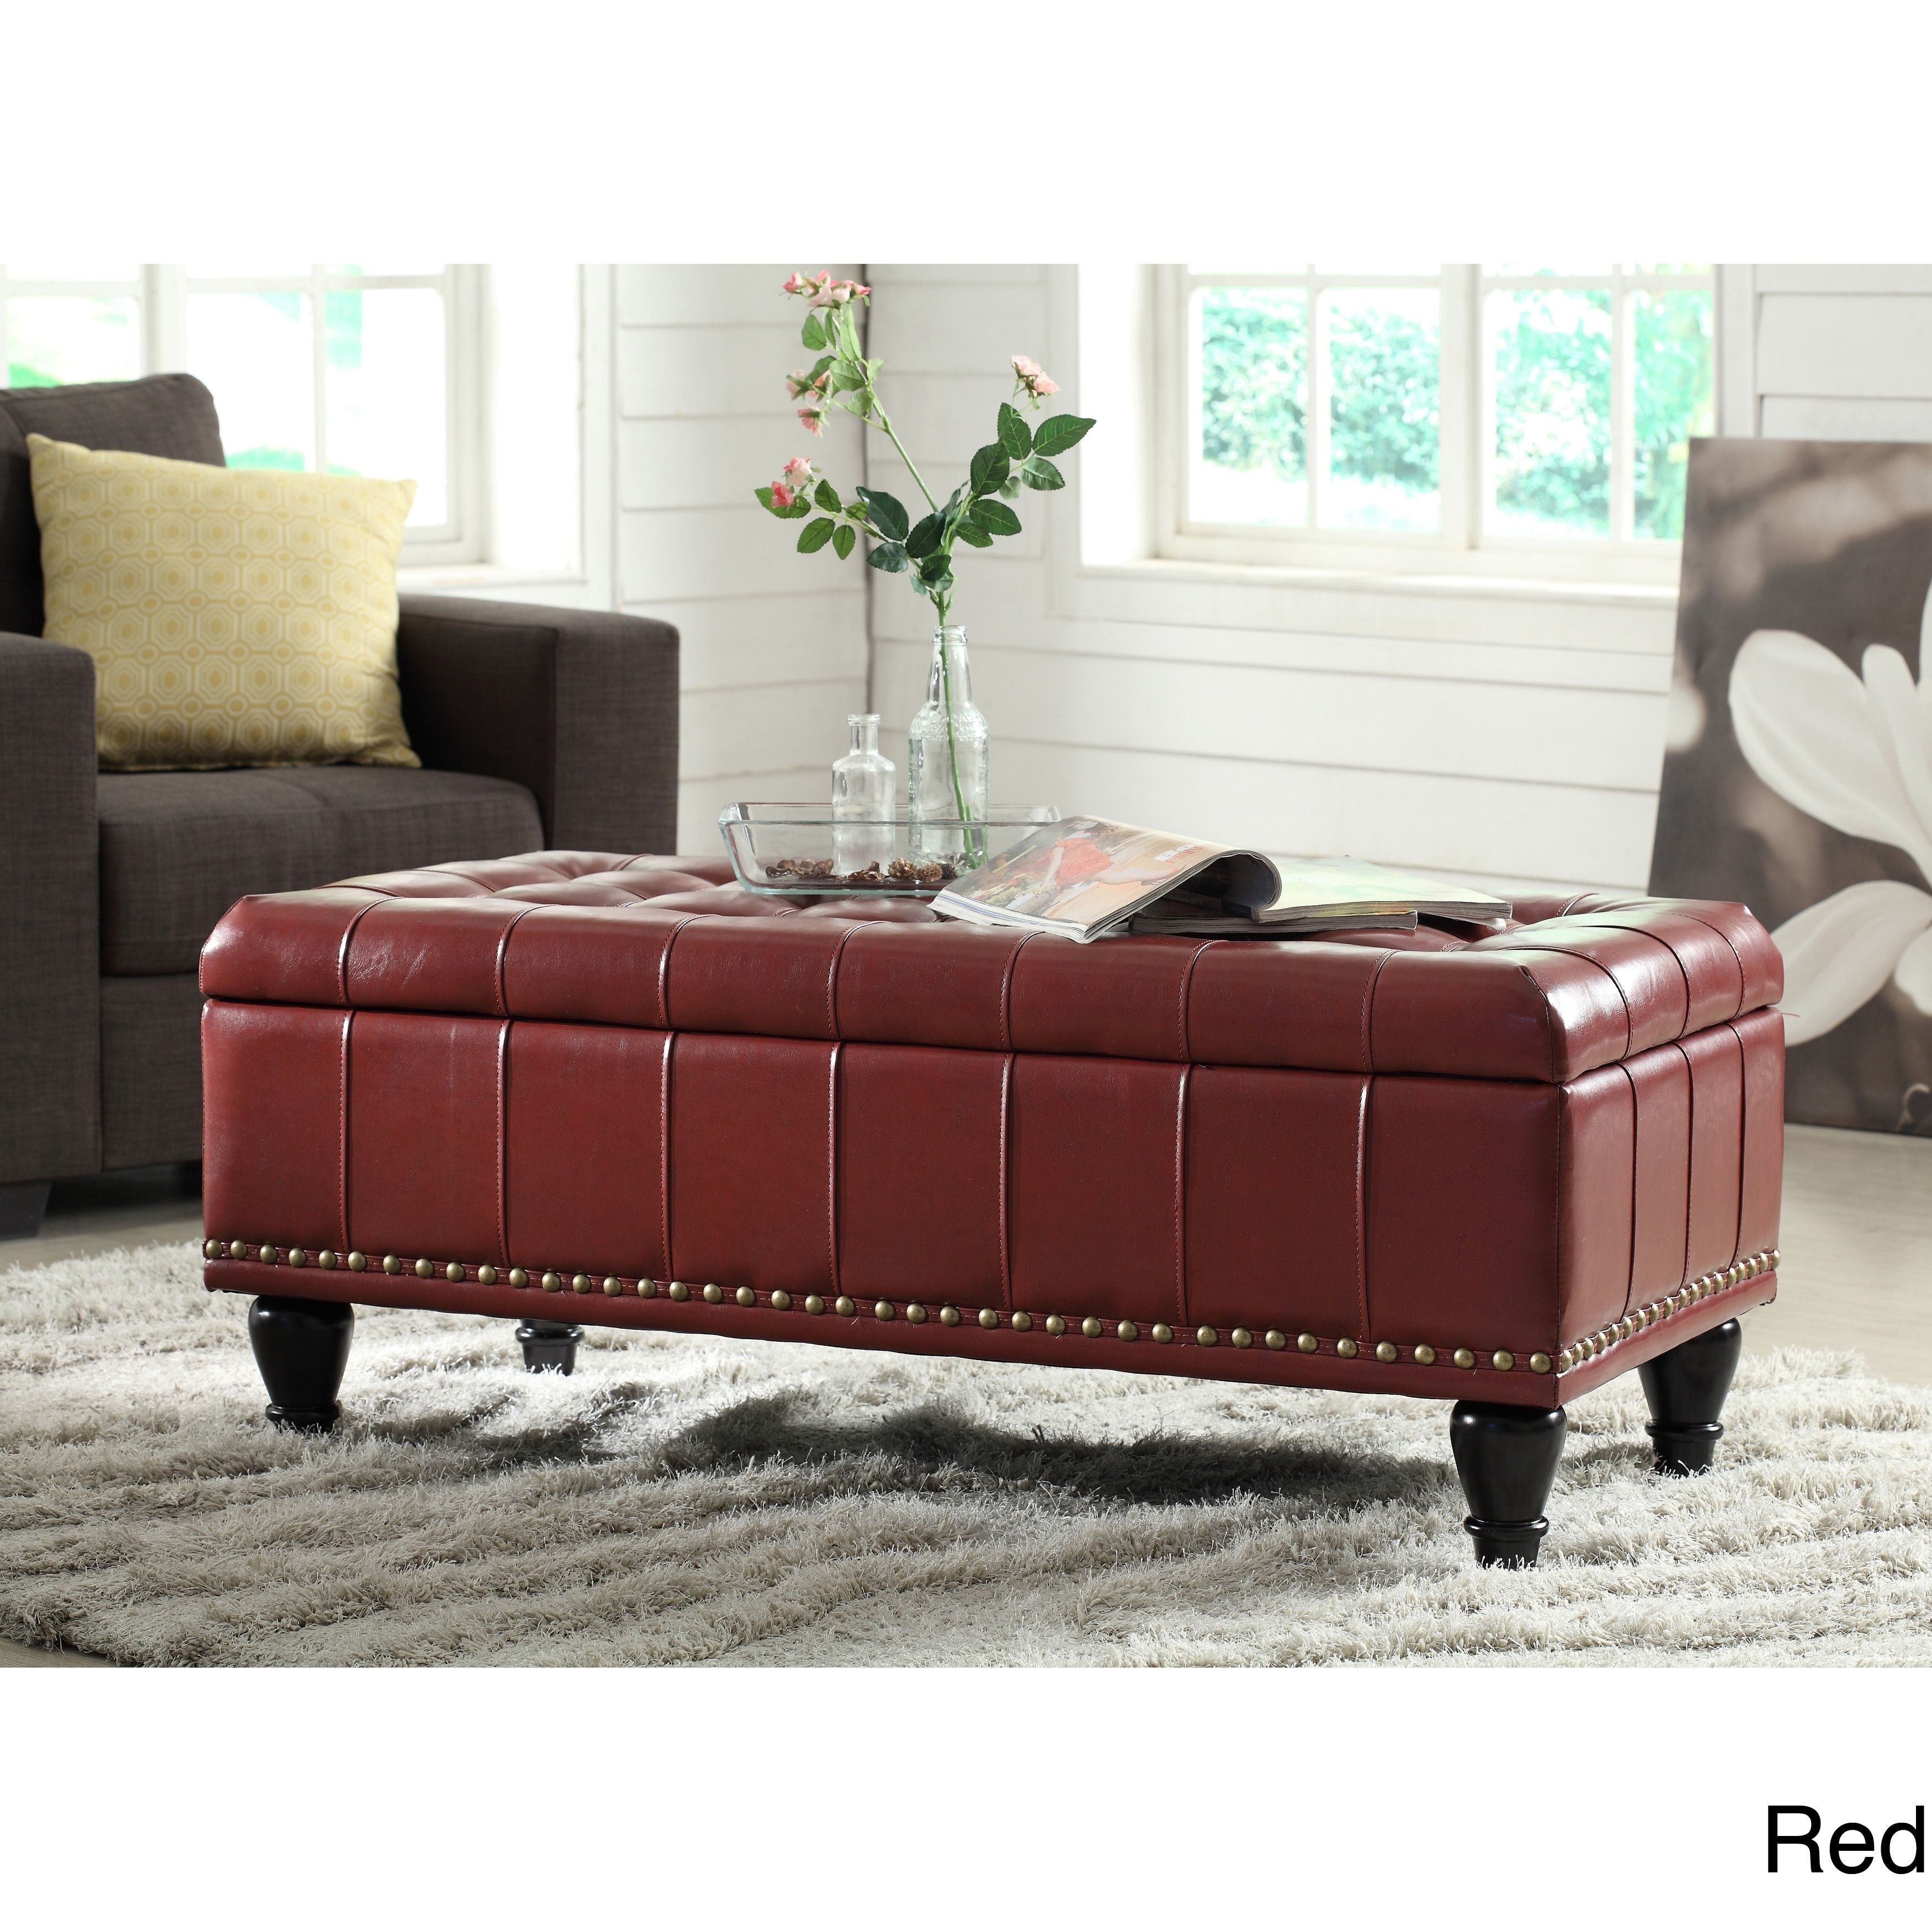 Buy Red Ottomans & Storage Ottomans Online At Overstock | Our With Regard To Mill Large Leather Coffee Tables (View 8 of 30)